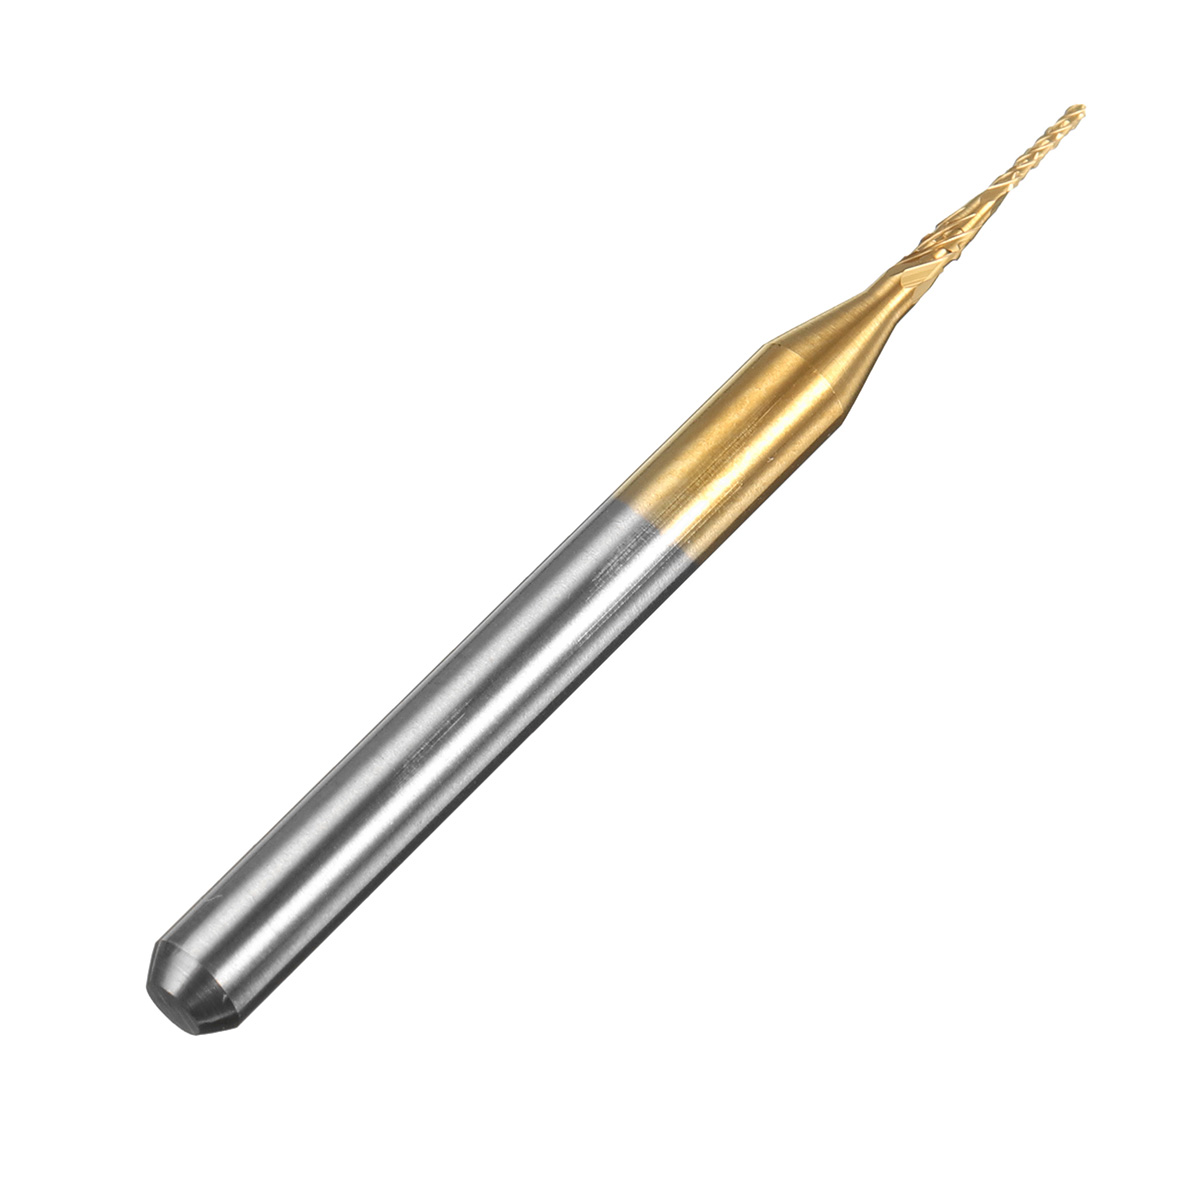 Drillpro-10pcs-07mm-Carbide-End-Mill-Cutter-Titanium-Coated-Engraving-Milling-Cutter-1532217-4